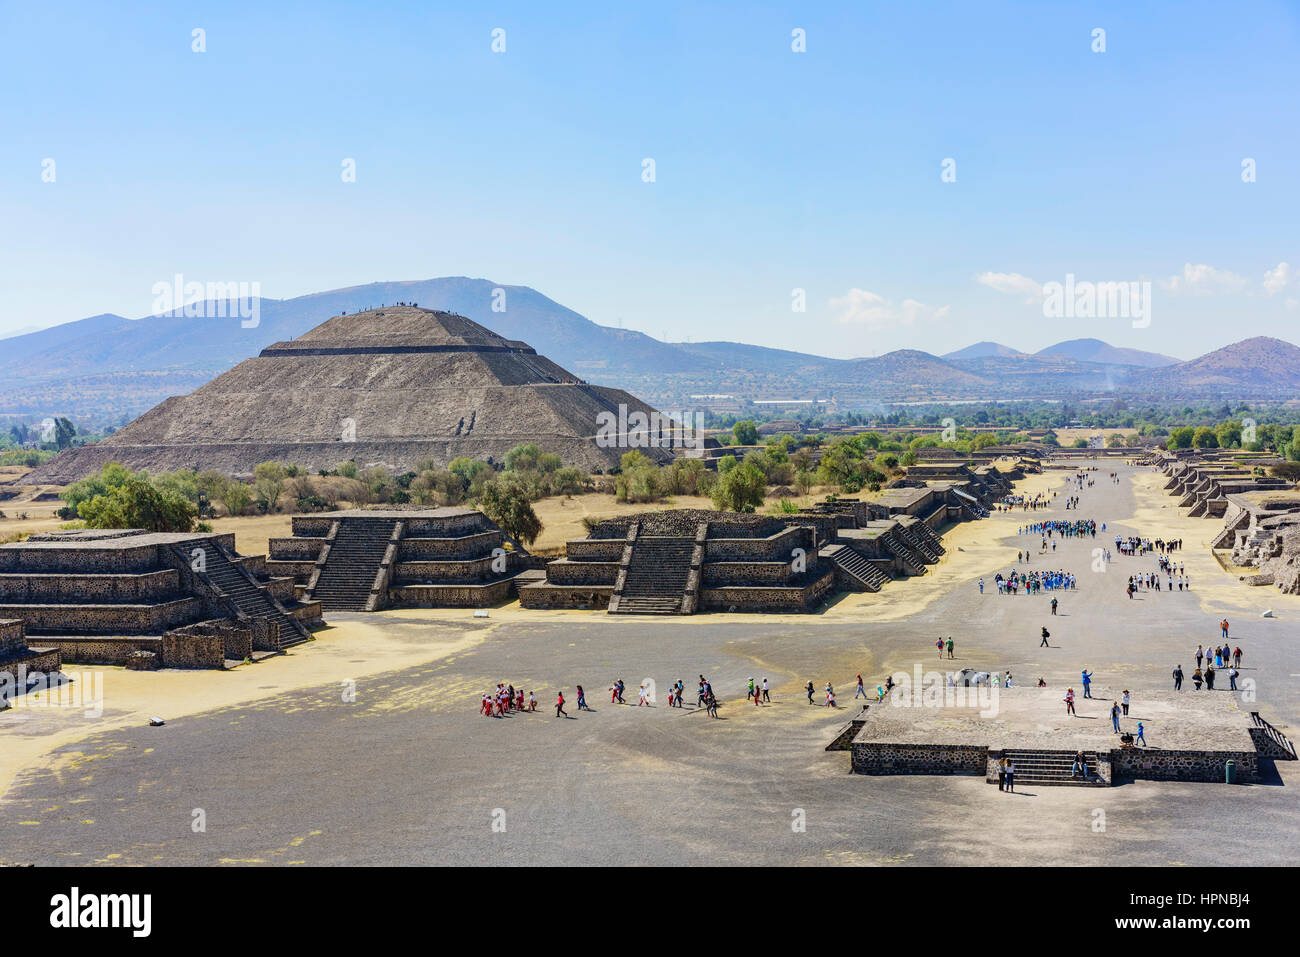 Aerial view of the famous and historical Pyramid of the Moon in Teotihuacan, Mexico Stock Photo